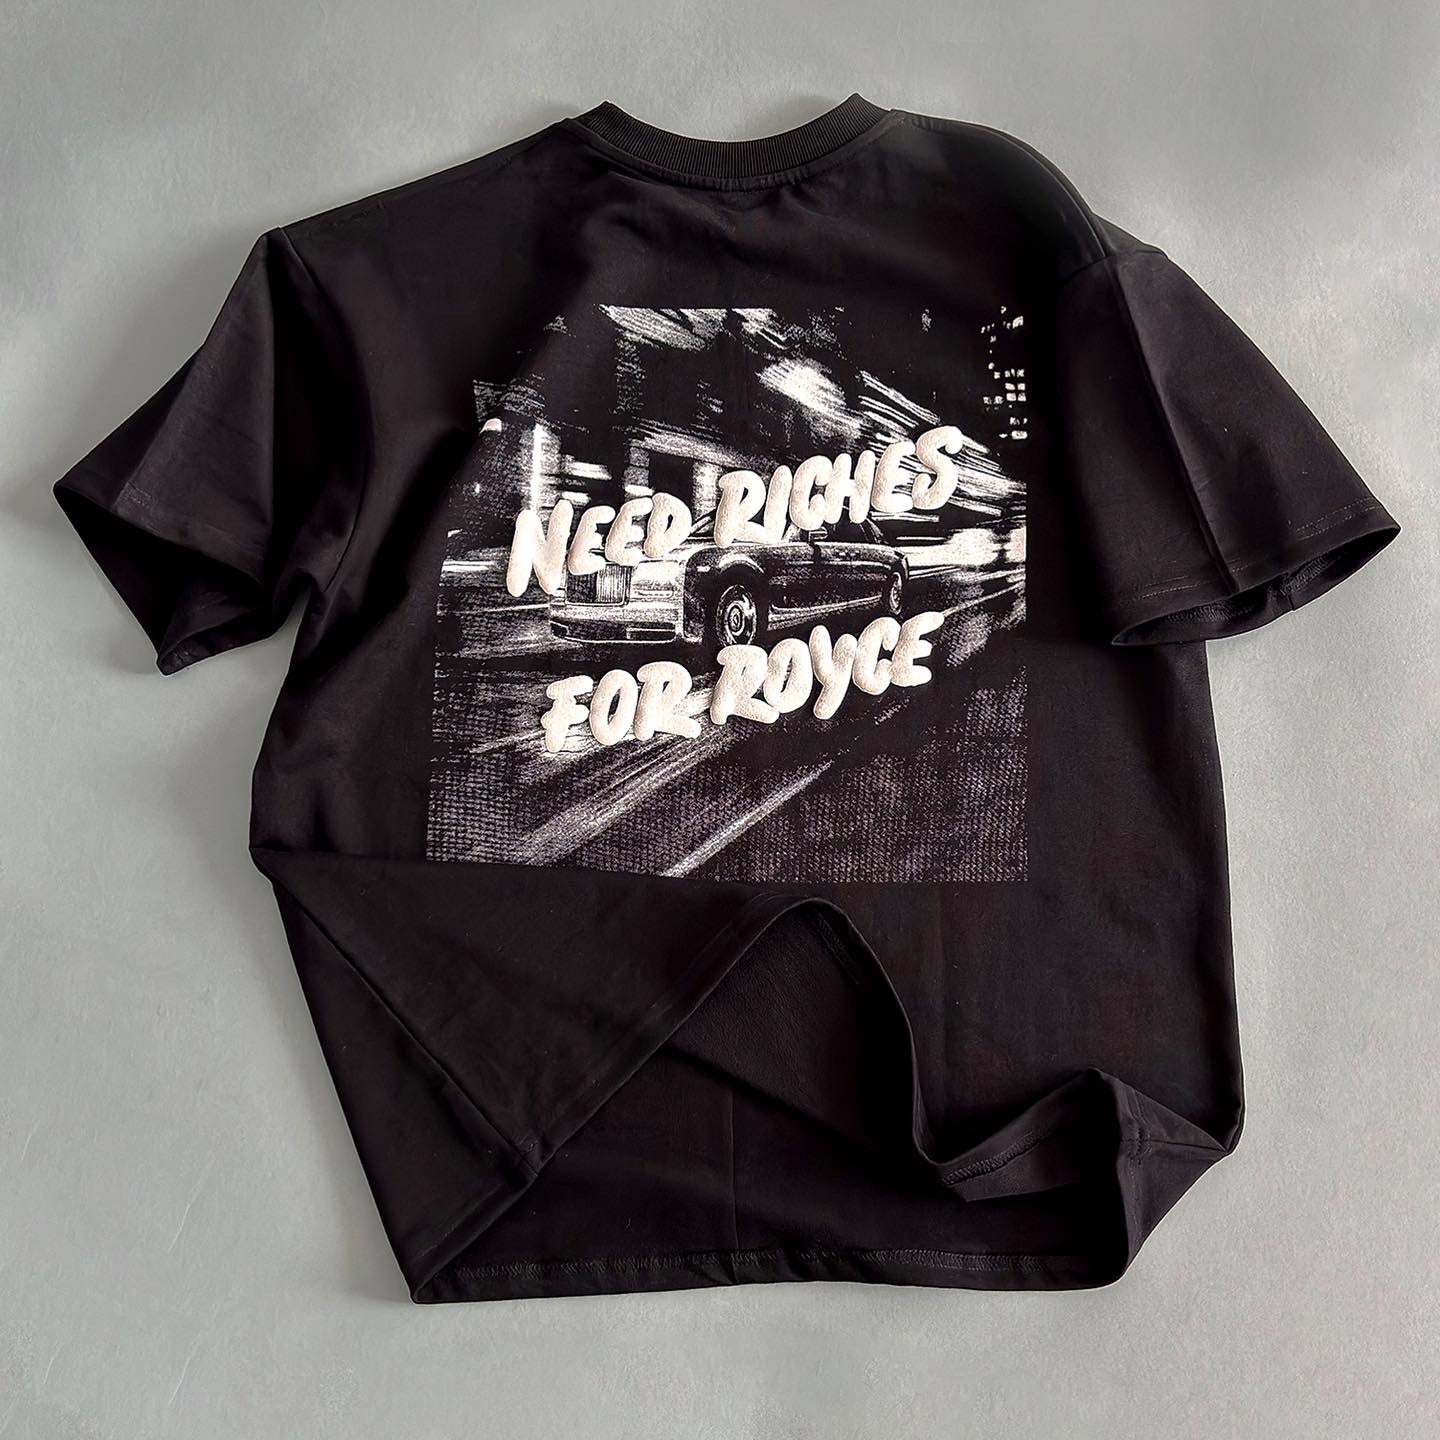 Need Riches For Rocye Puff Print Oversized T-Shirt